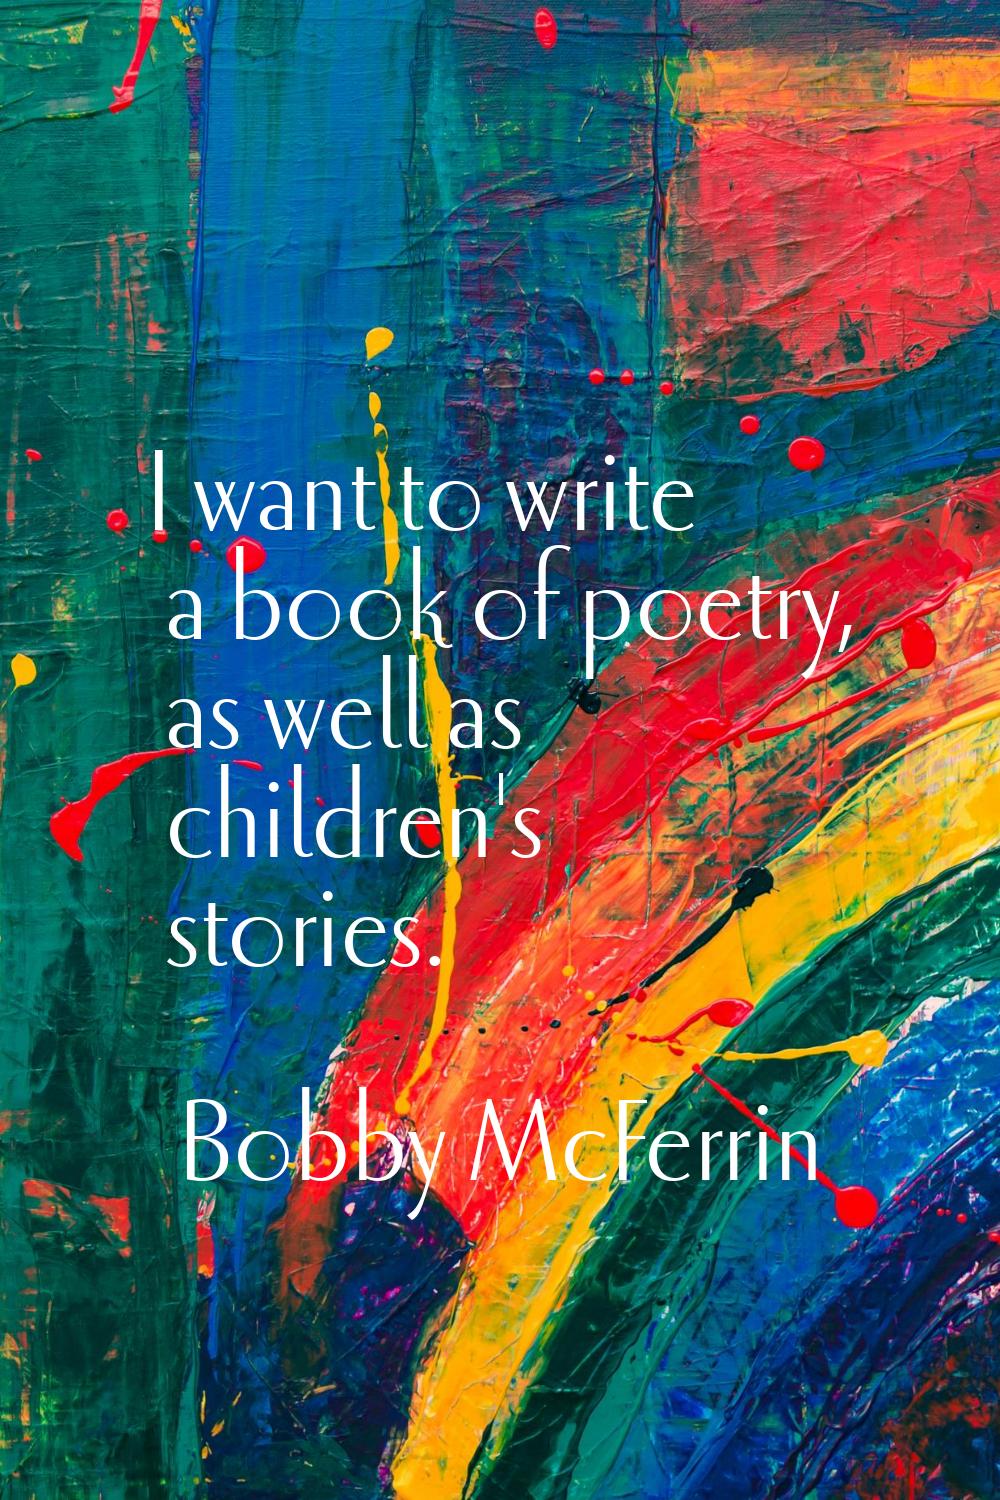 I want to write a book of poetry, as well as children's stories.